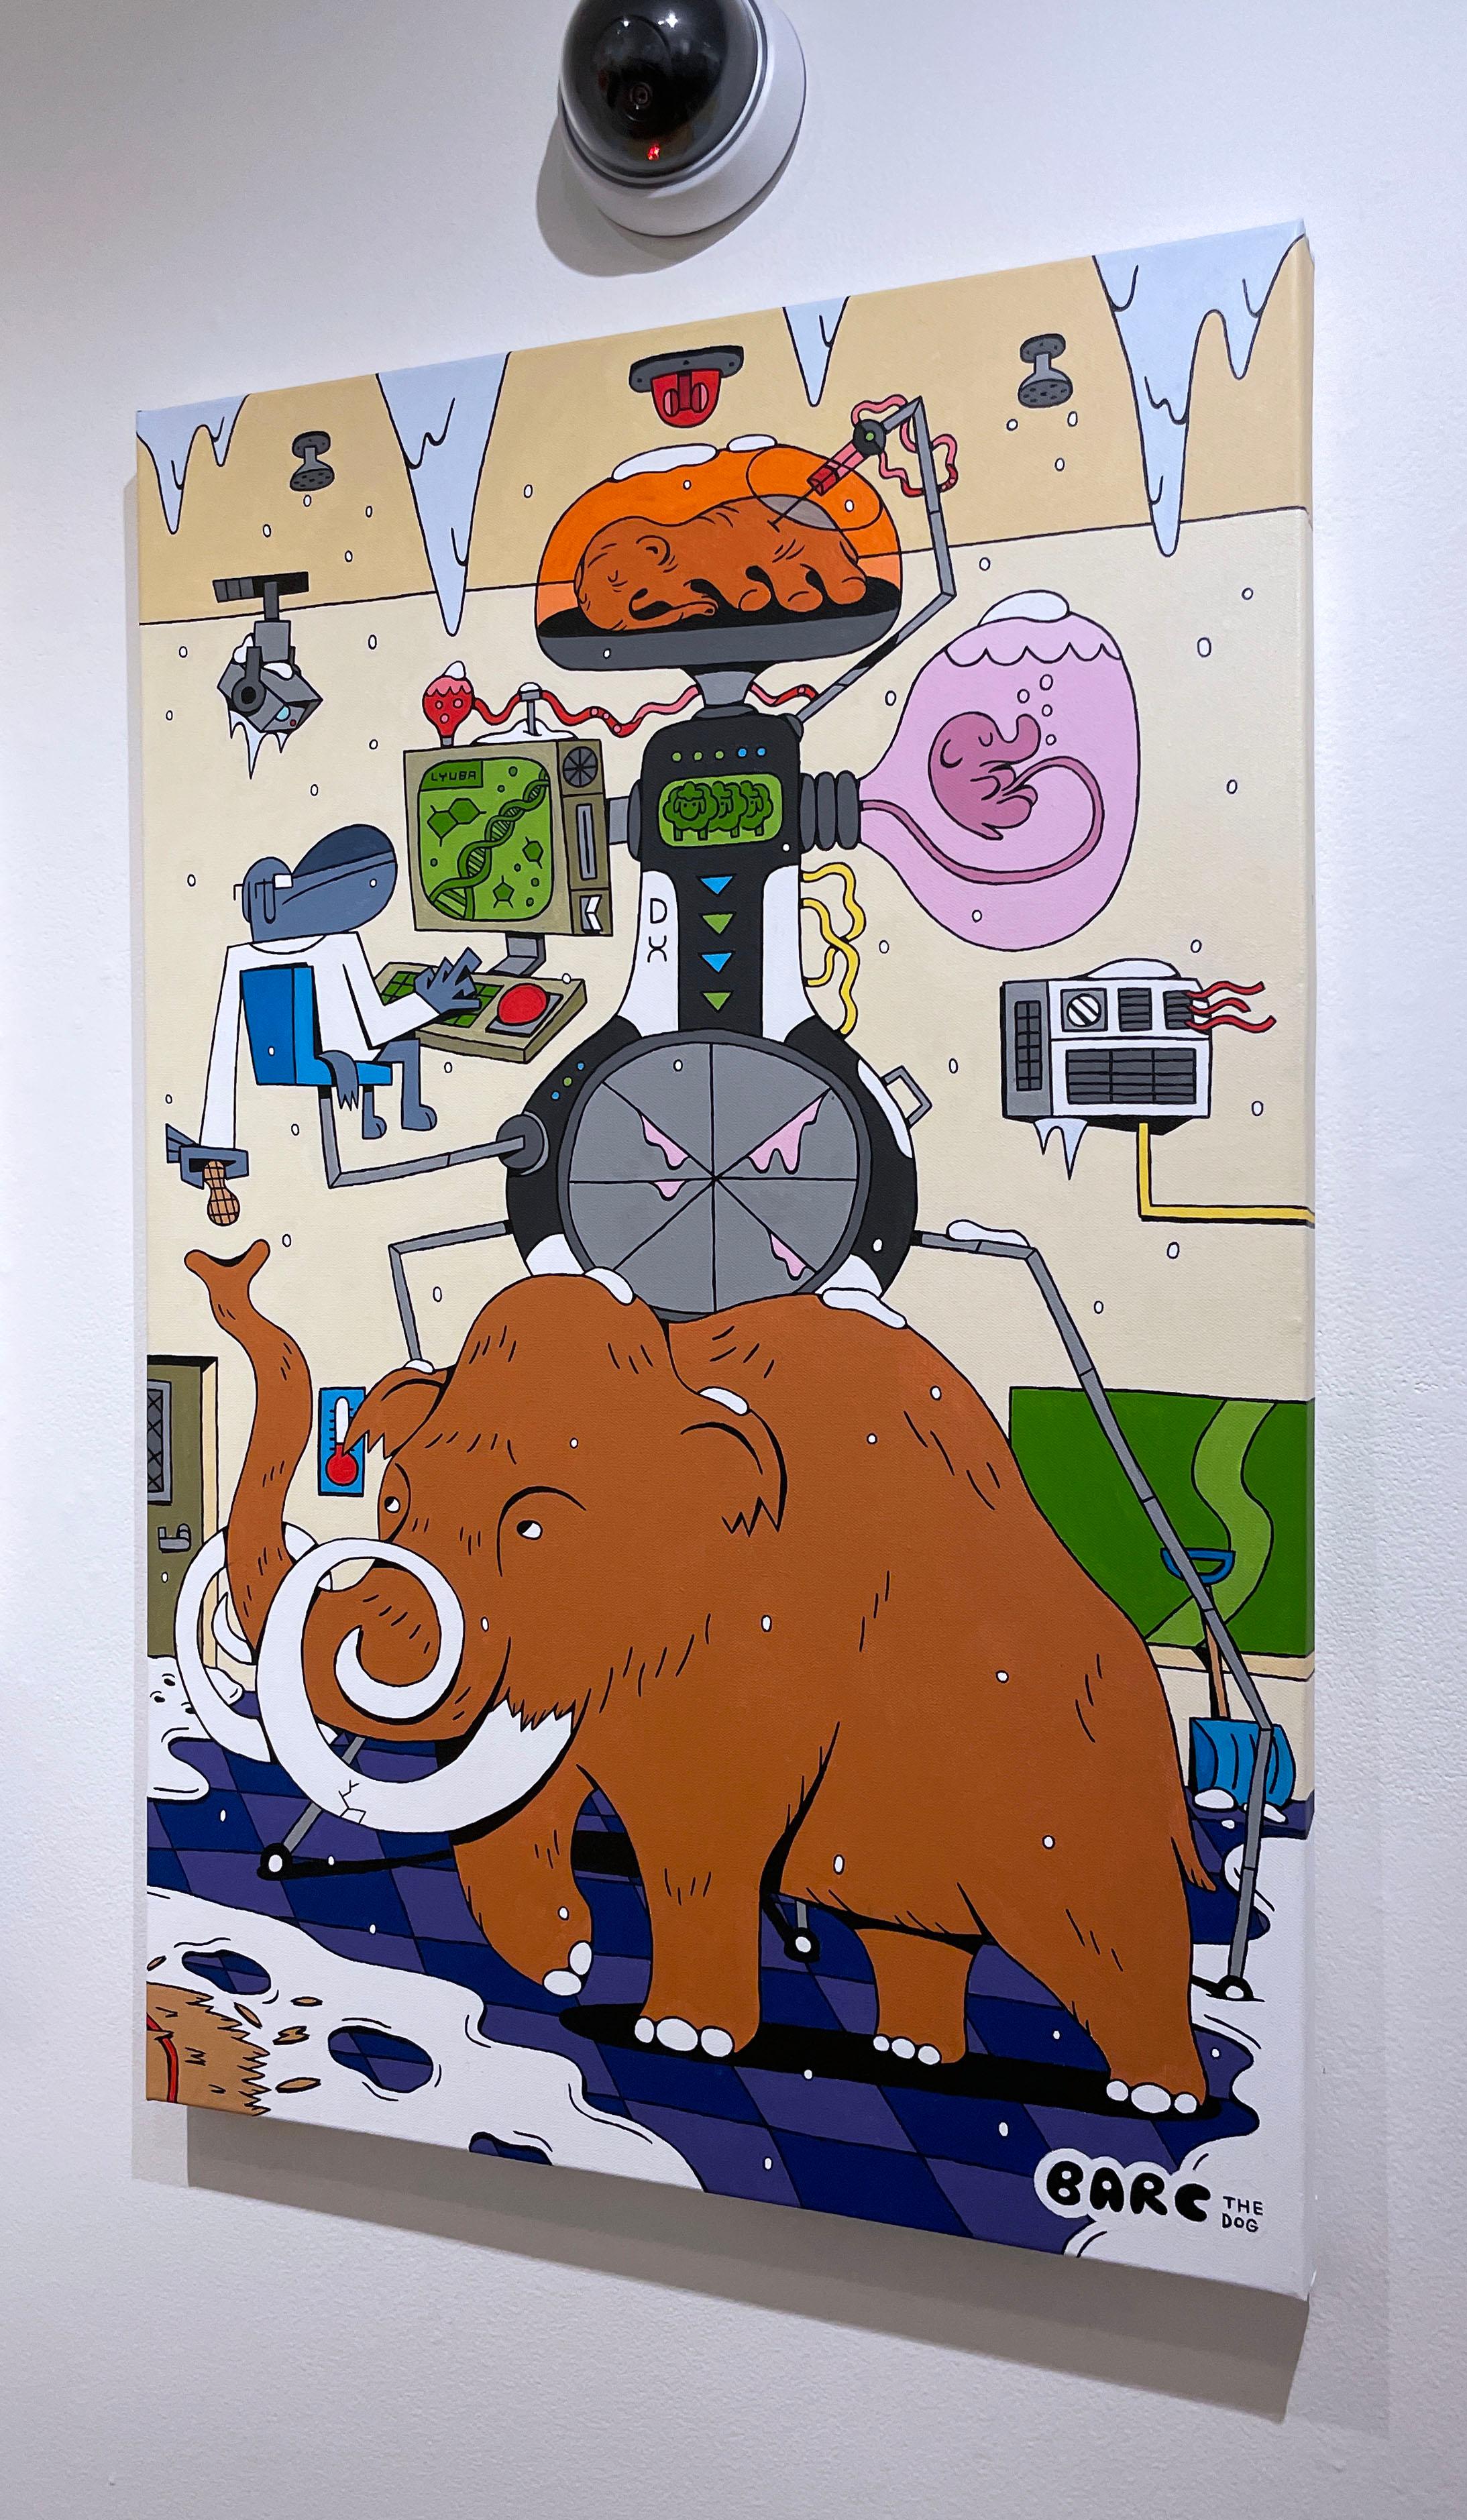 De-Extinctionizer (Lyuba) by BARC the dog (2022), pop art comic book style, acrylic on canvas, illustration, cartoon inspired character art, laboratory scene, science, woolly mammoth, machines, surrealism

Welcome to the world BARC the dog. In this